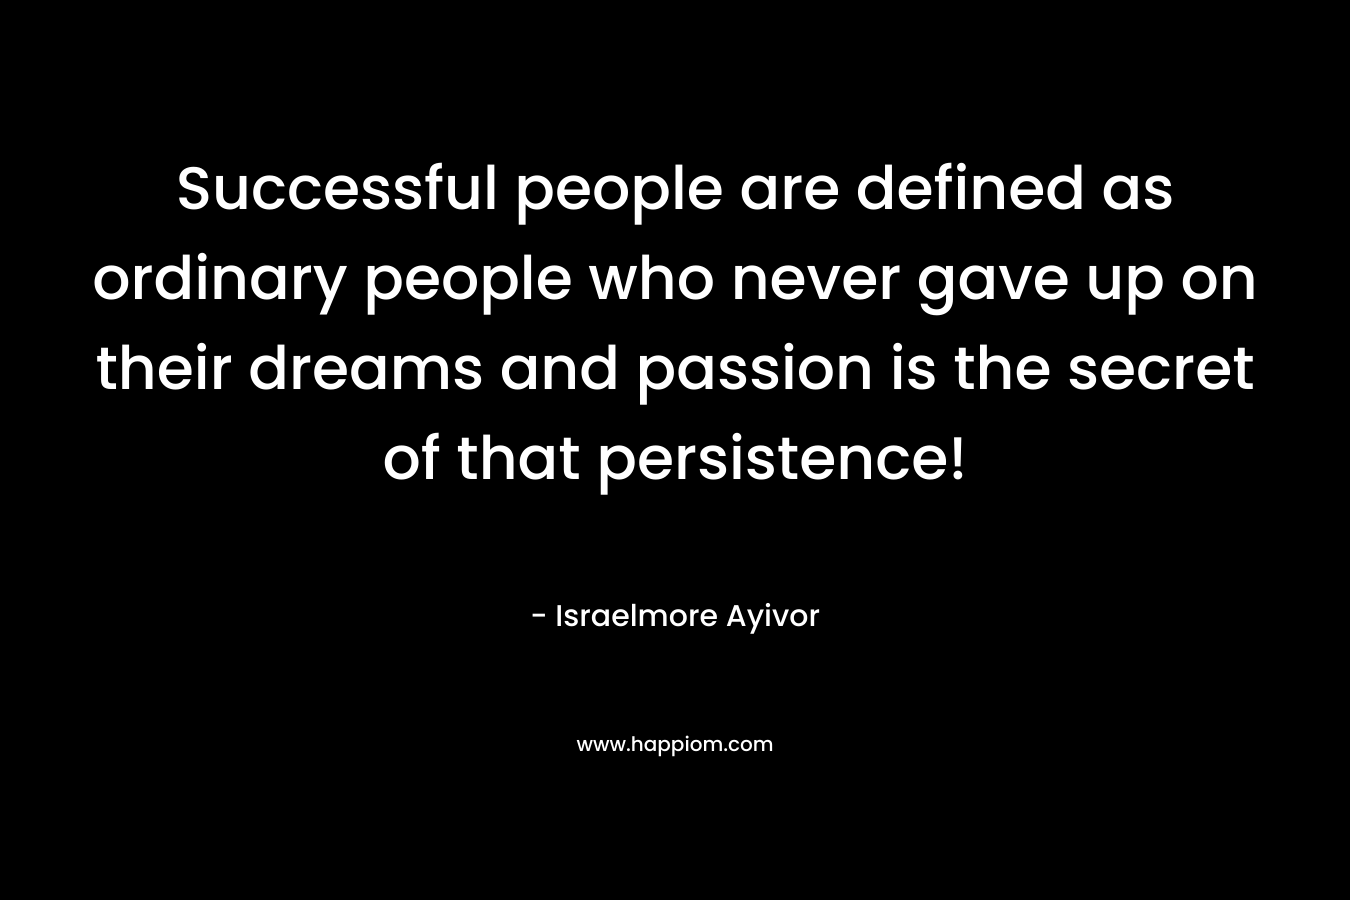 Successful people are defined as ordinary people who never gave up on their dreams and passion is the secret of that persistence!